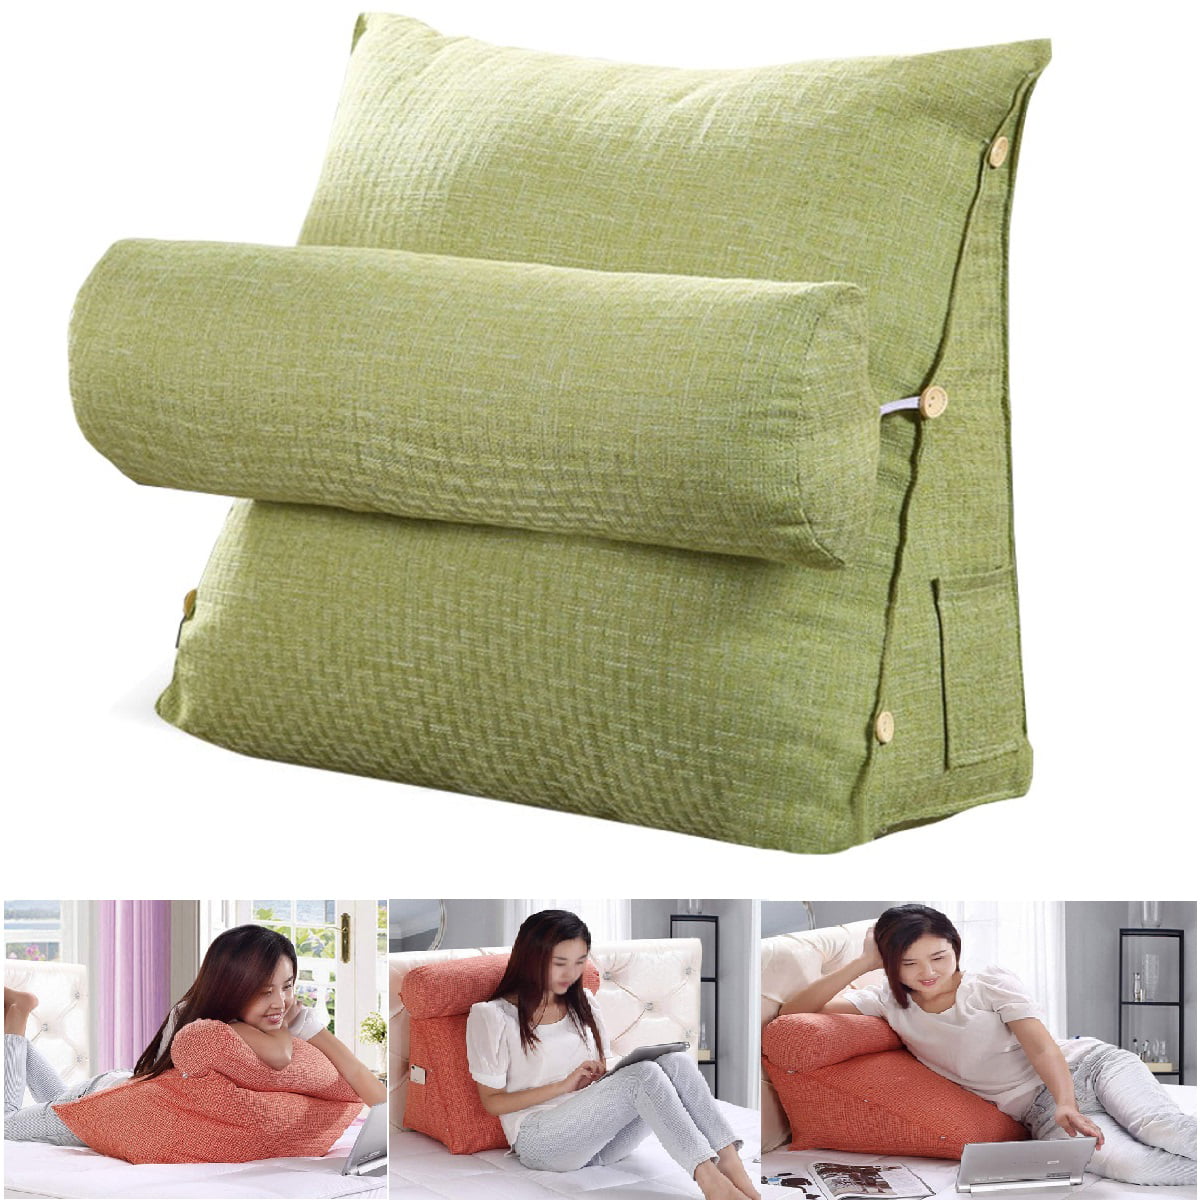 18X18X8 inch, Medium Wedge Shaped Reading and TV Pillow with Adjustable Neck Pillow, Triangle